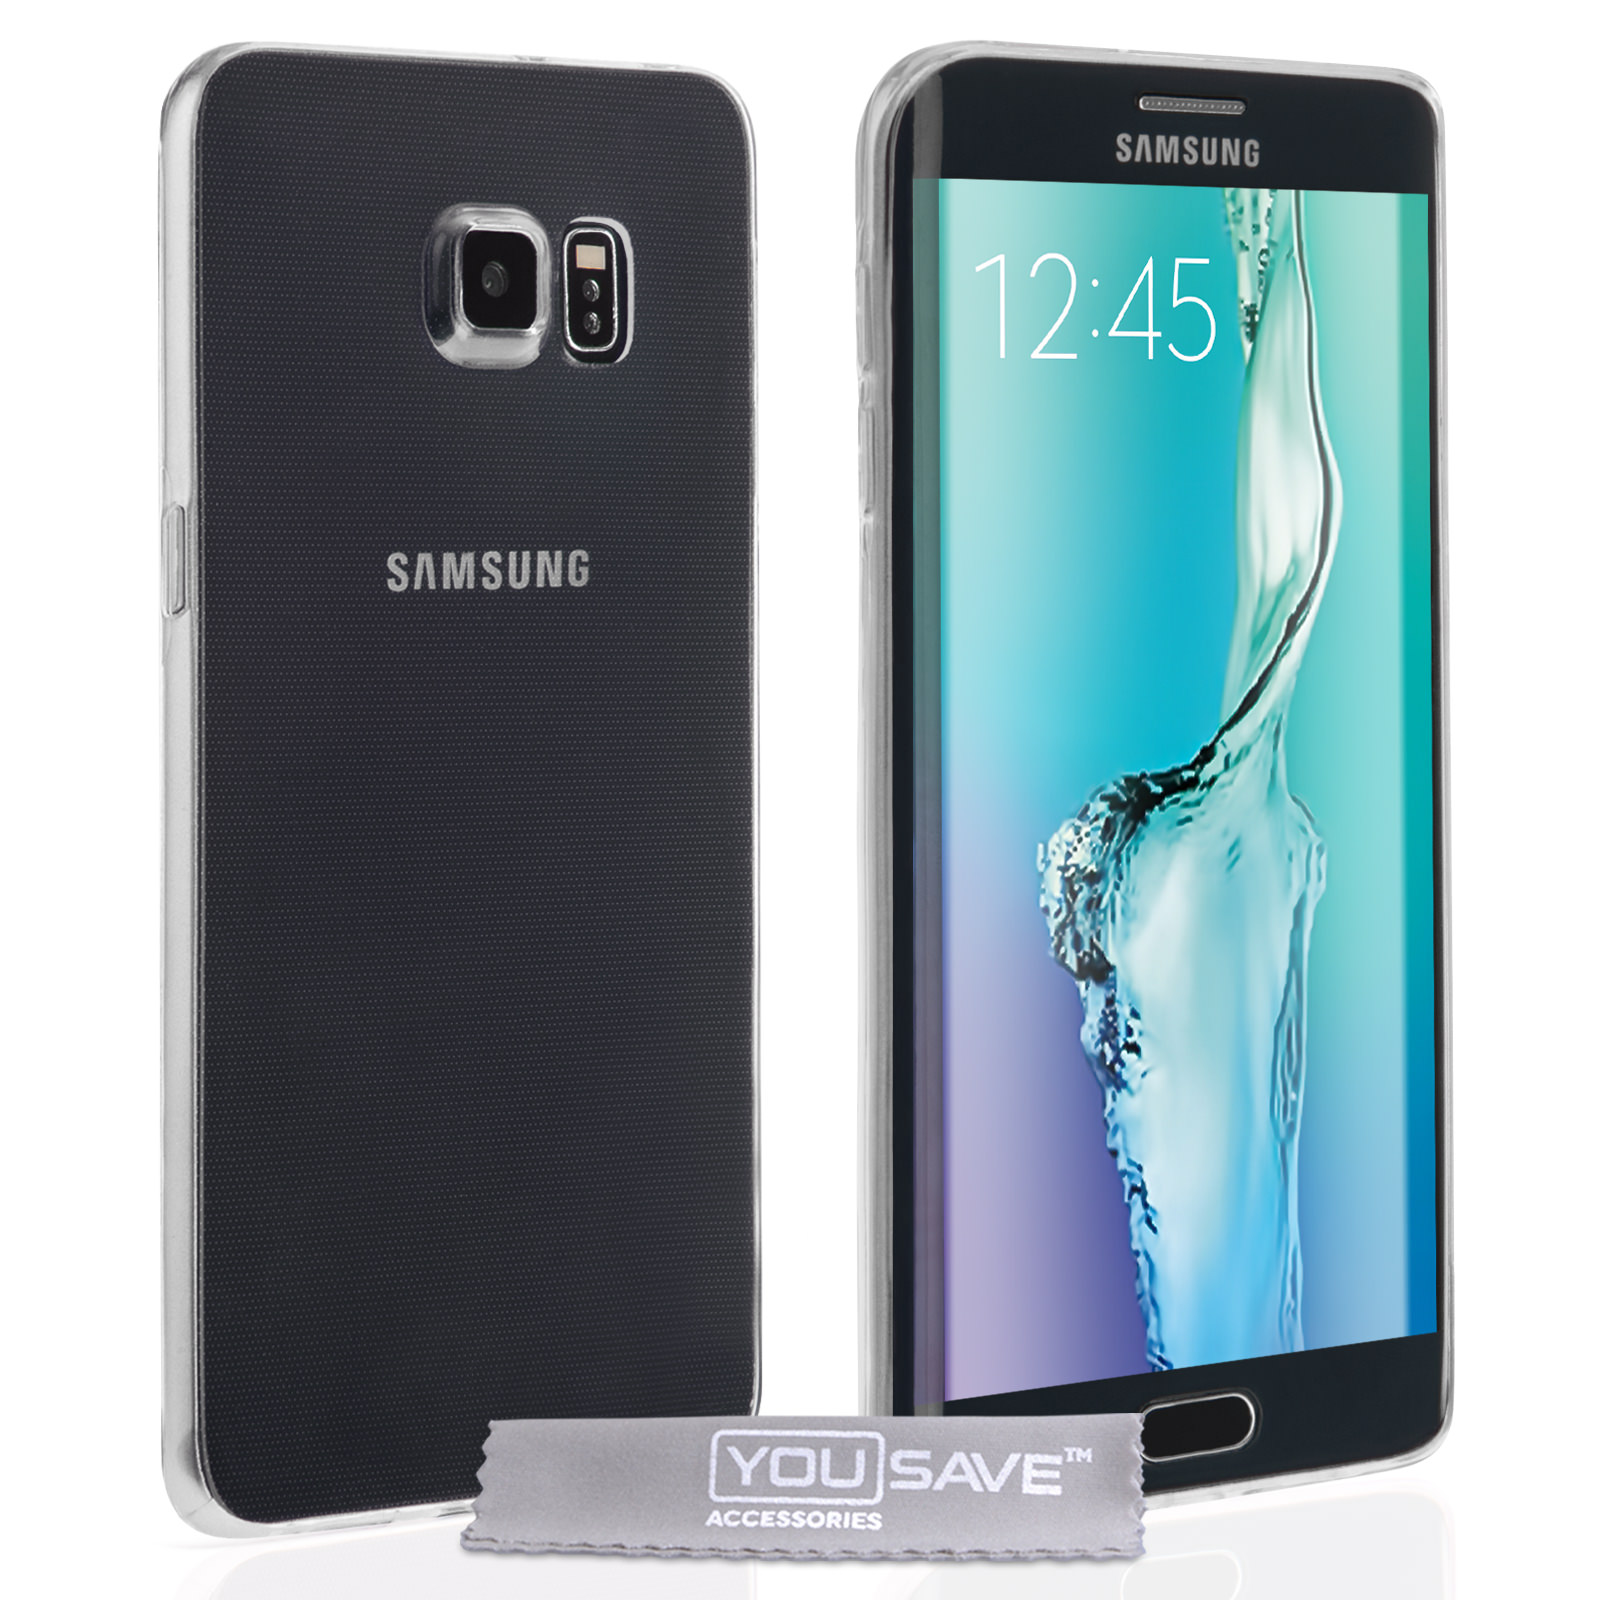 Yousave Accessories Samsung Galaxy S6 Edge Plus Ultra -Thin Gel Clear Case